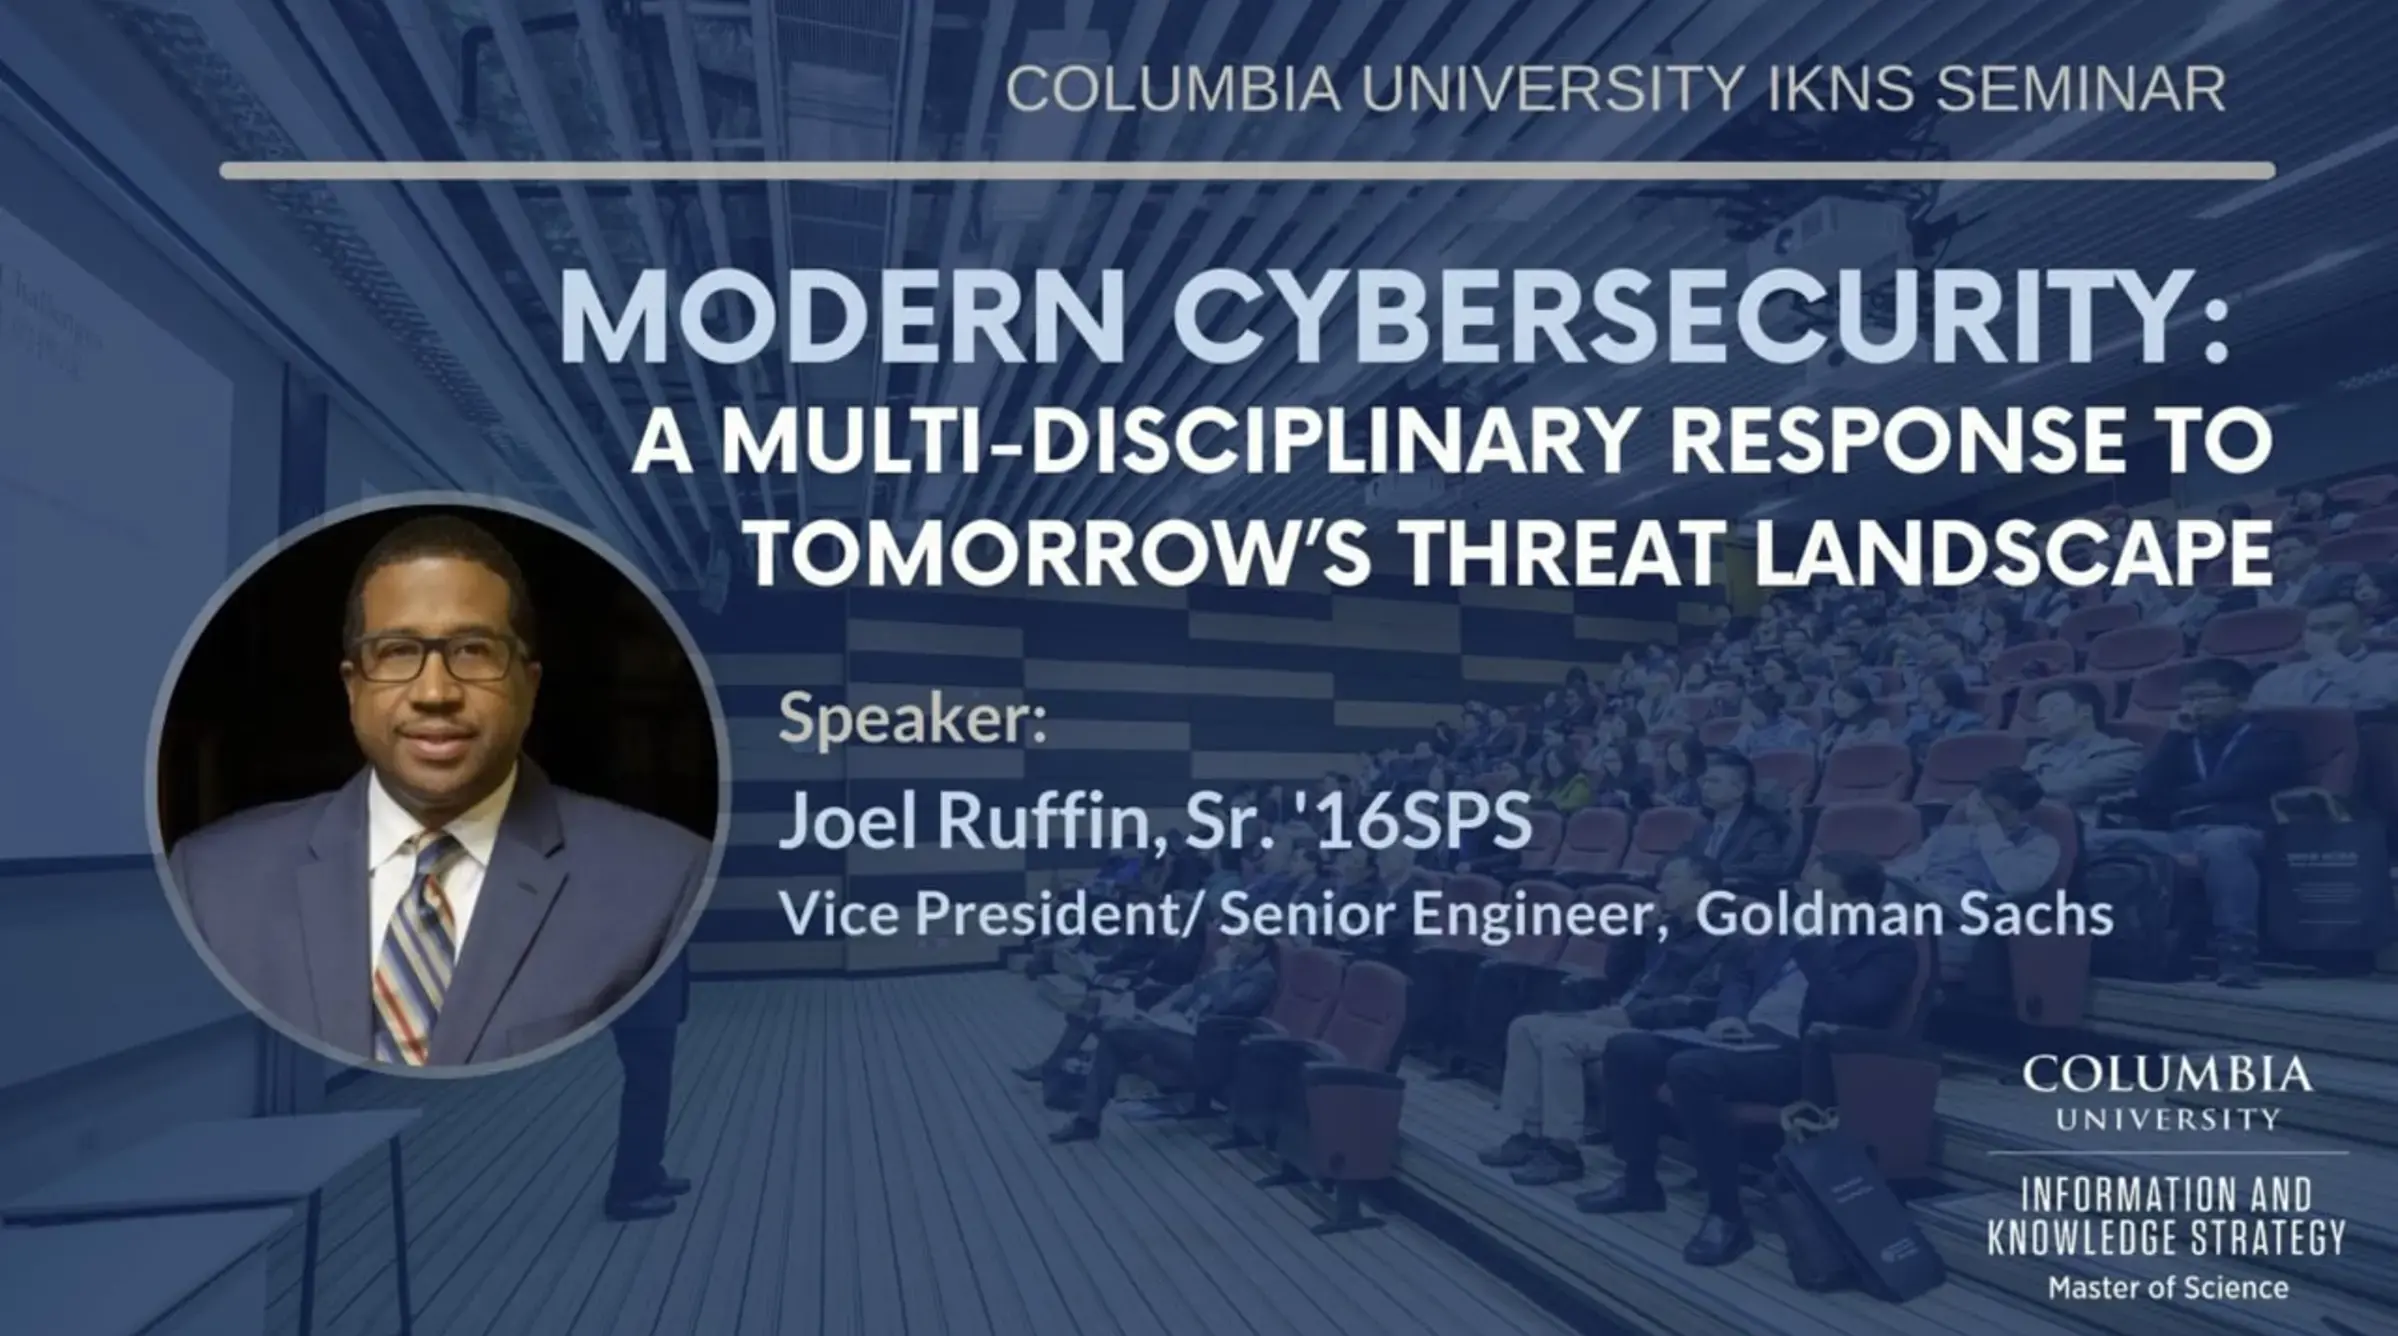 Modern Cybersecurity: A Multi-Disciplinary Response to Tomorrow’s Threat Landscape - Joel Ruffin